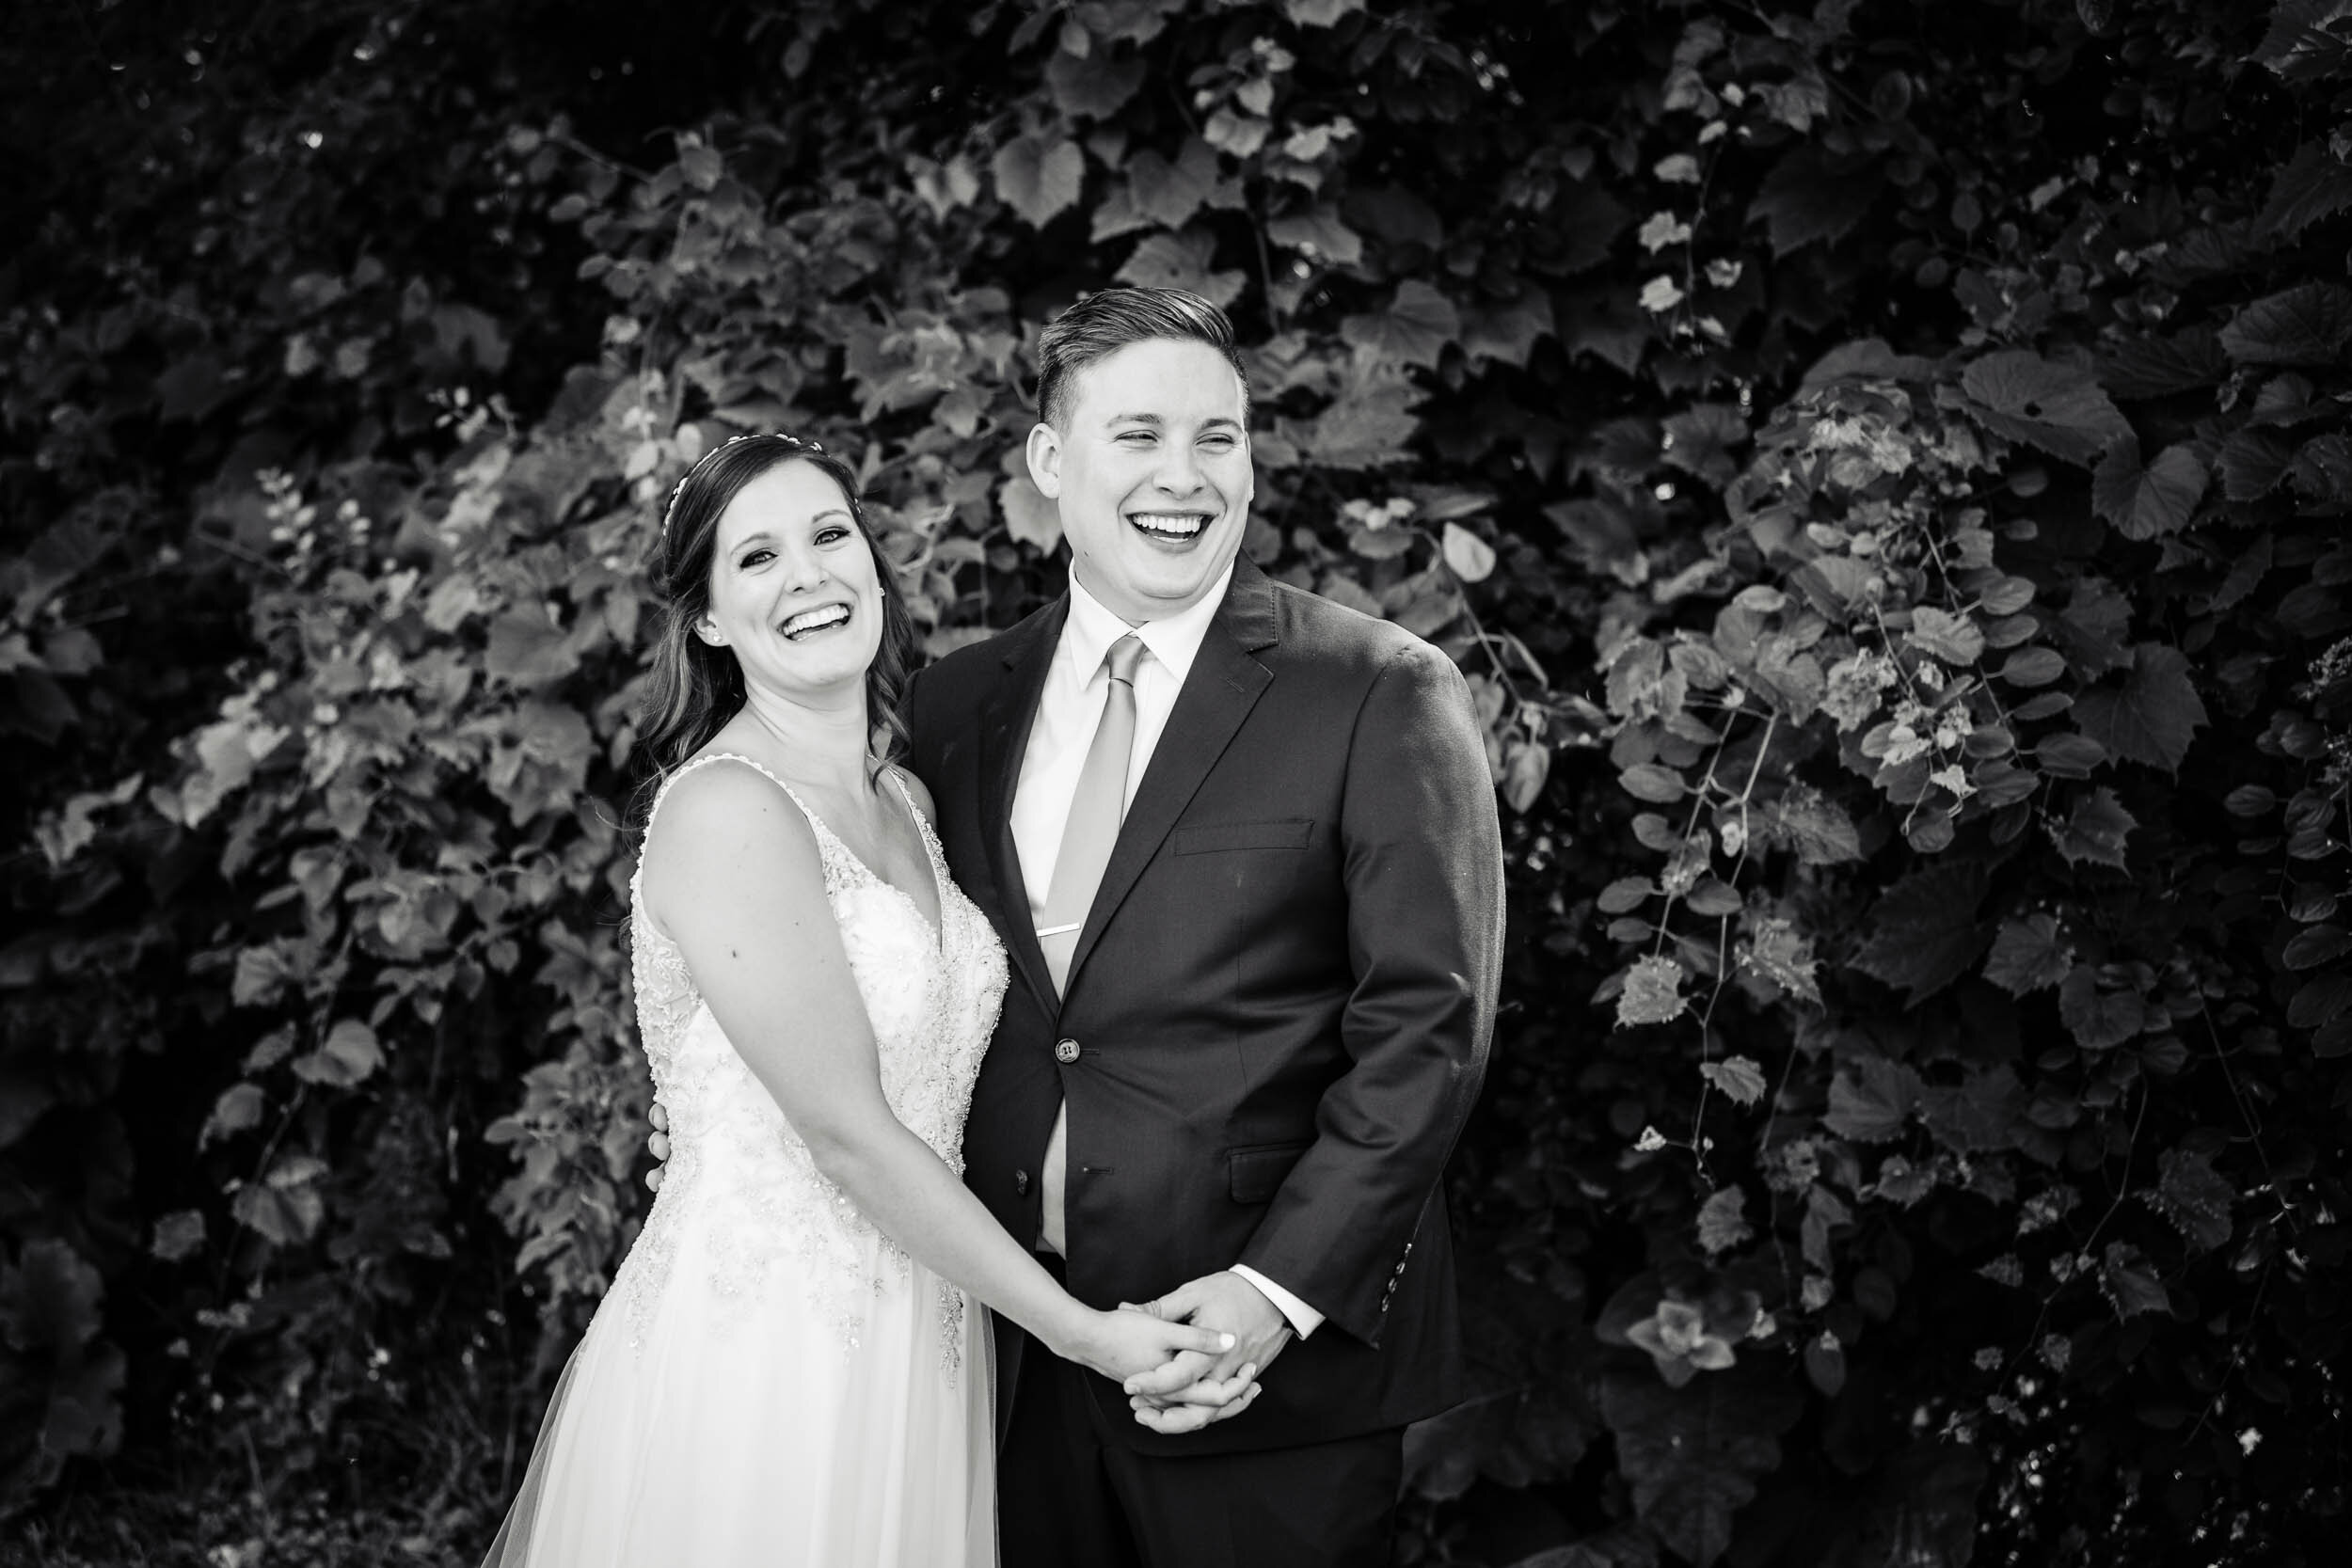 Bride and groom share a laugh during portraits: Chicago backyard wedding photographed by J. Brown Photography.